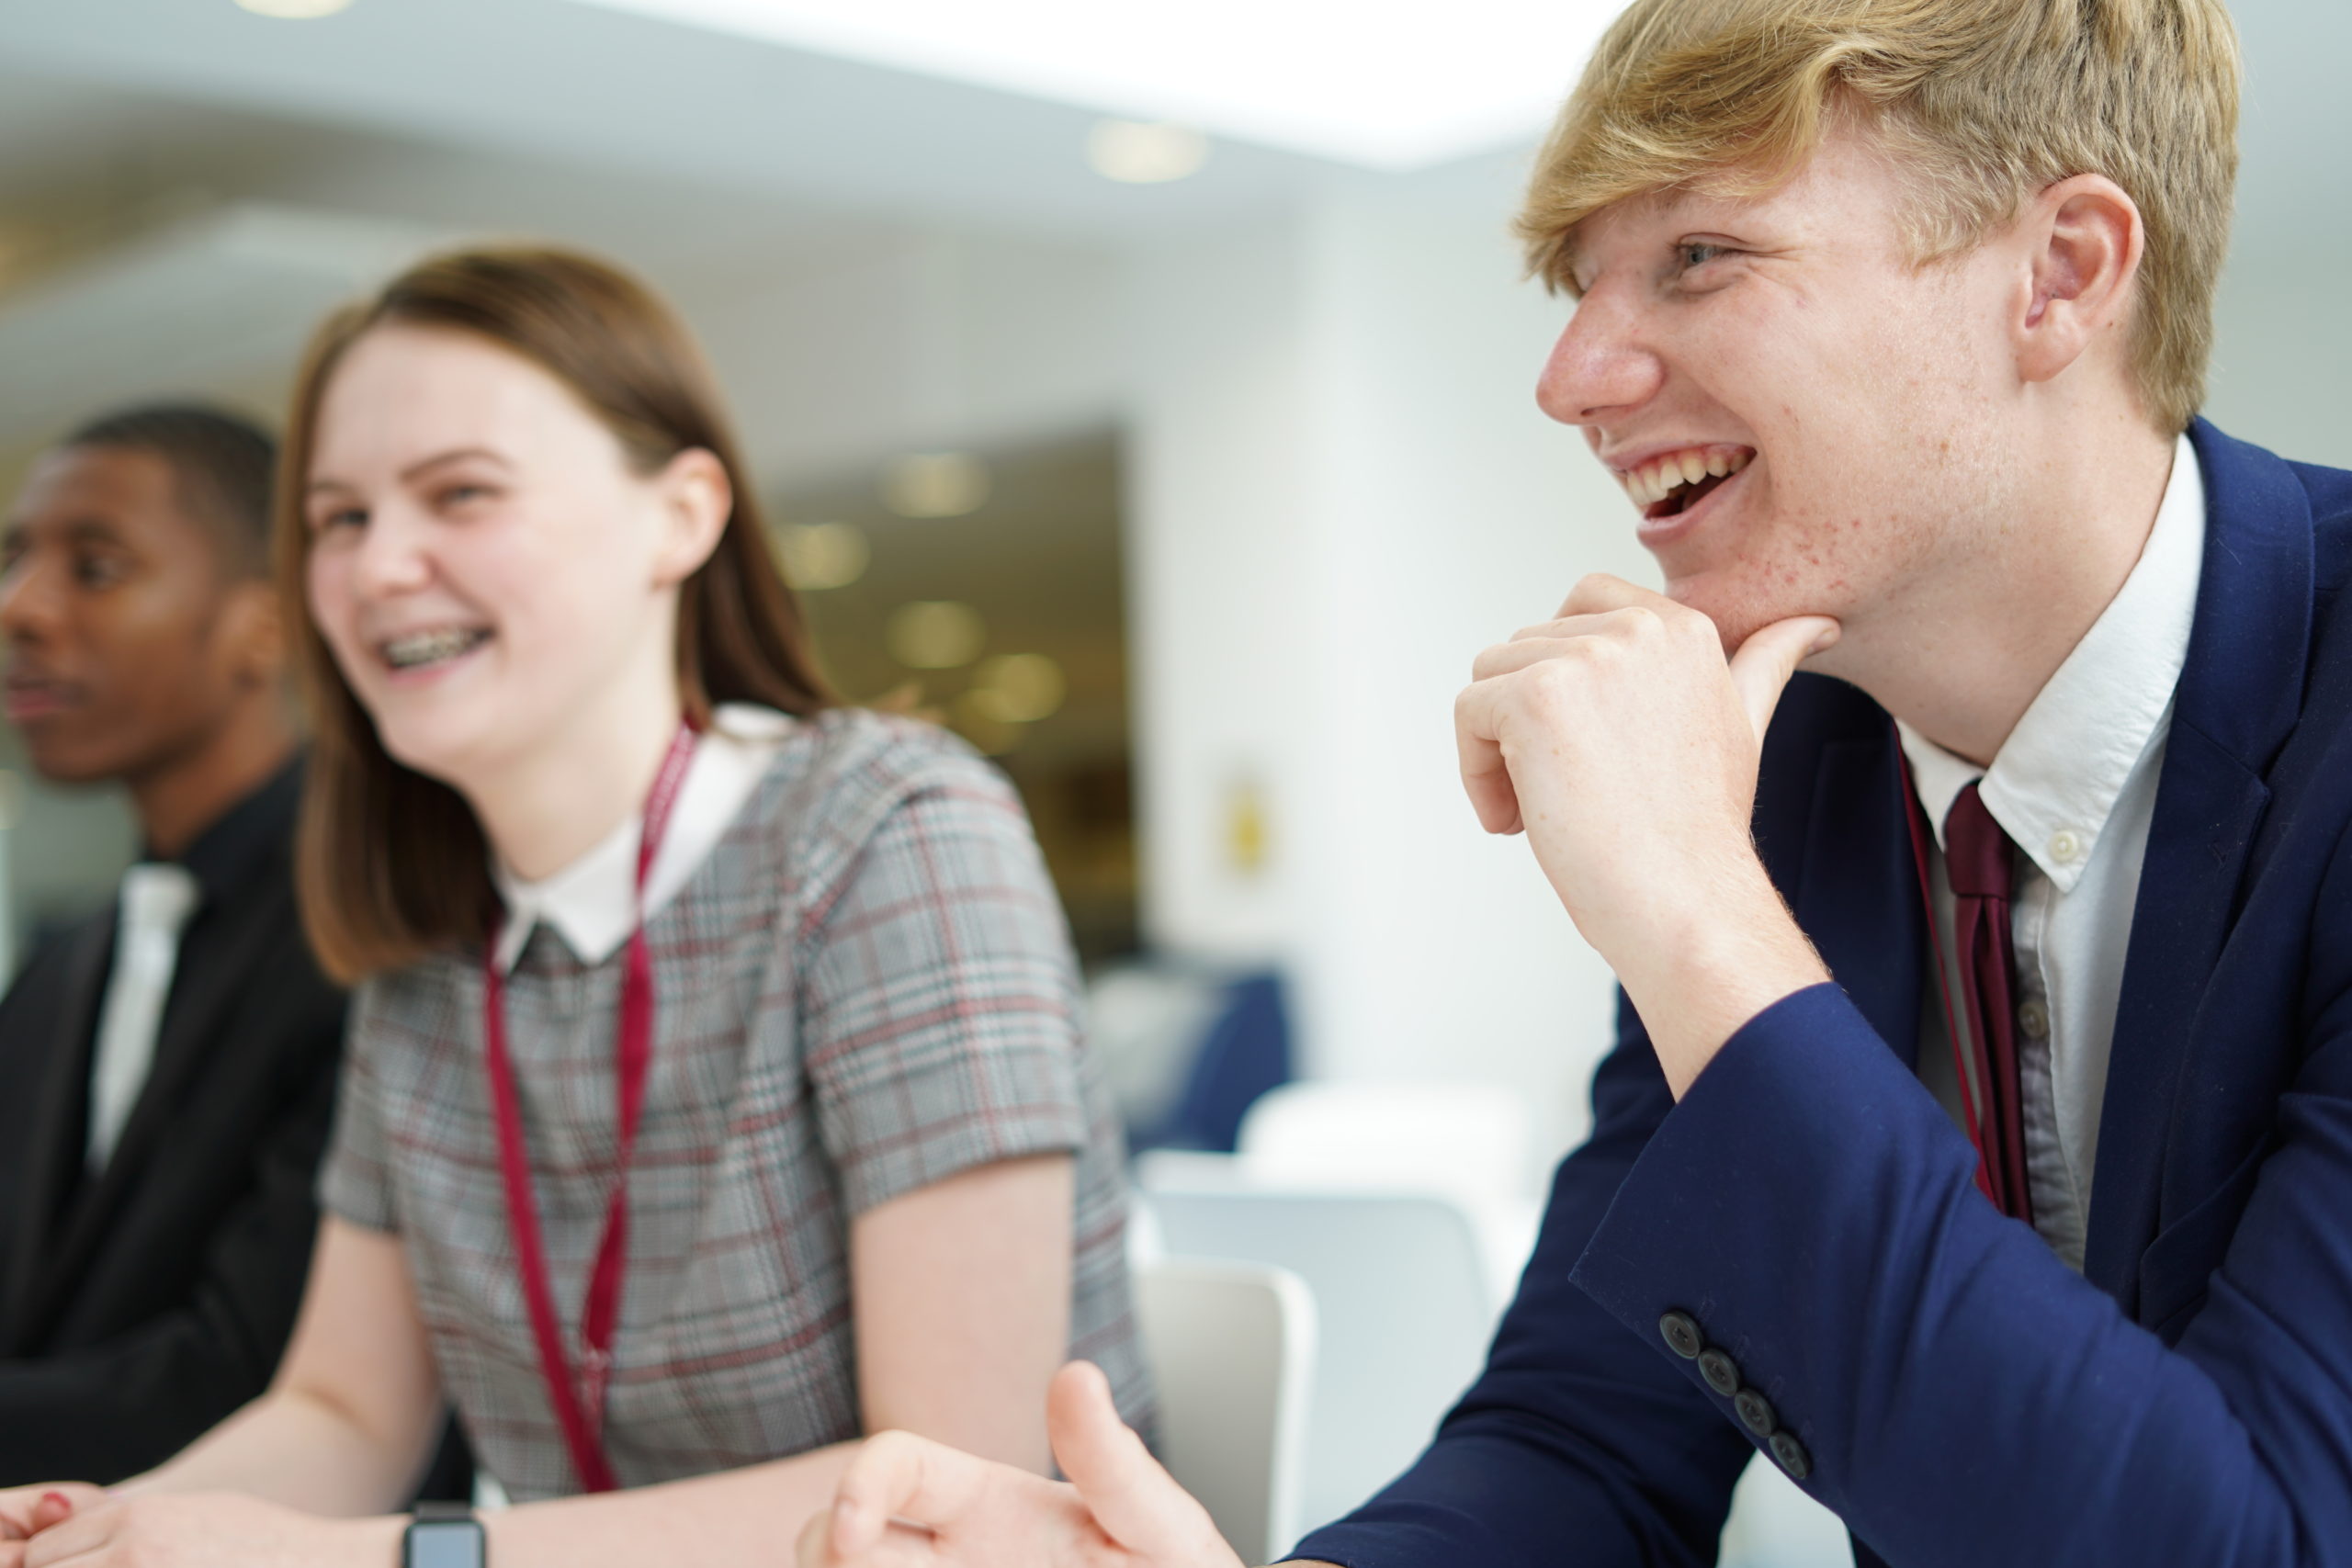 Two Post-16 students are shown laughing and smiling at people across the table from them.